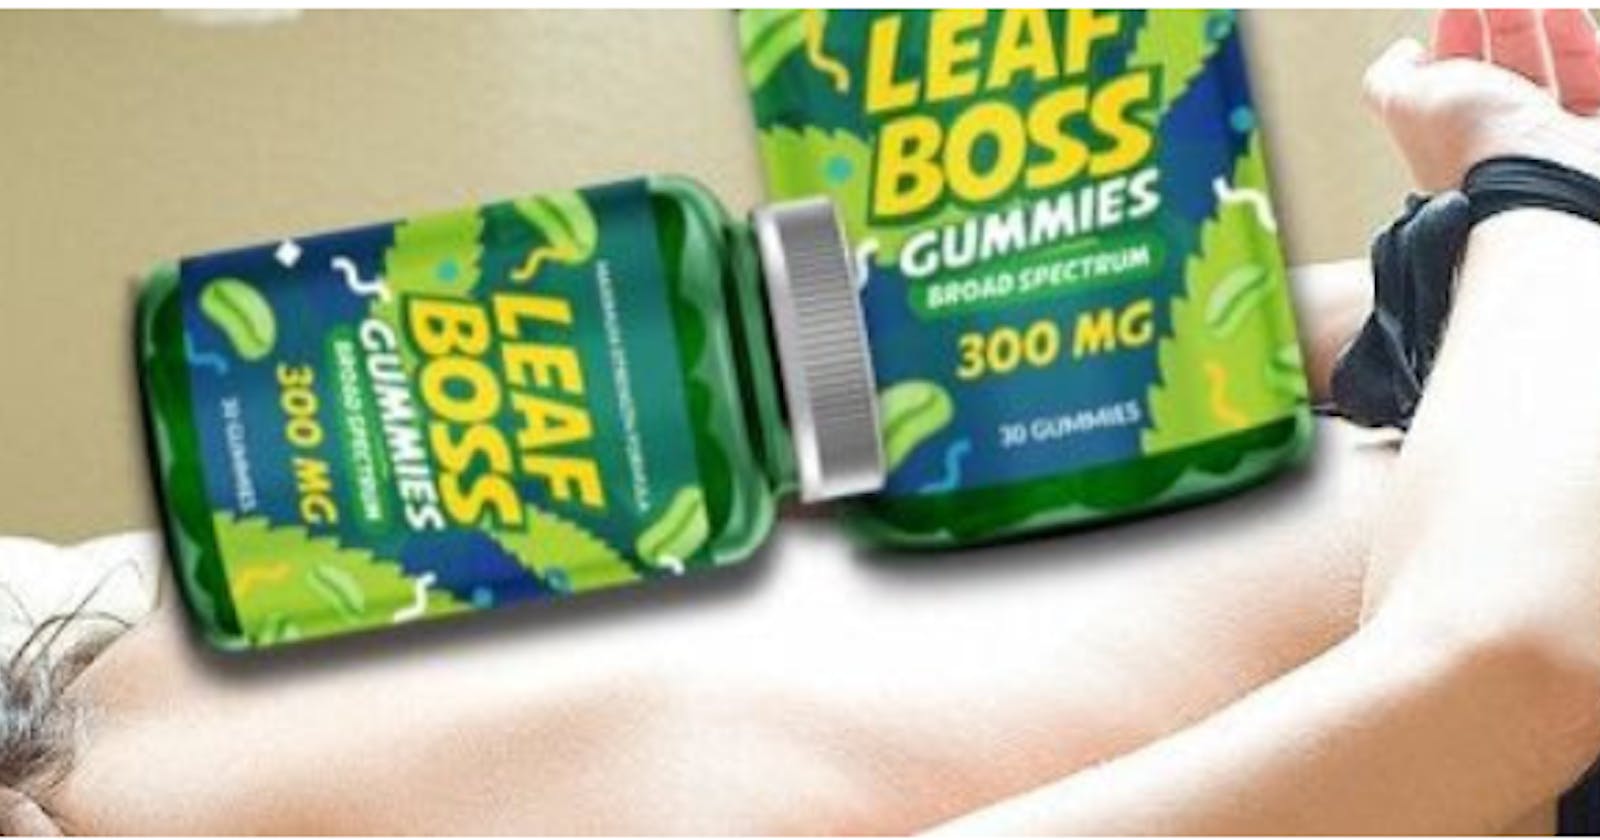 Leaf Boss Gummies Reviews Is Scam Or Trusted?